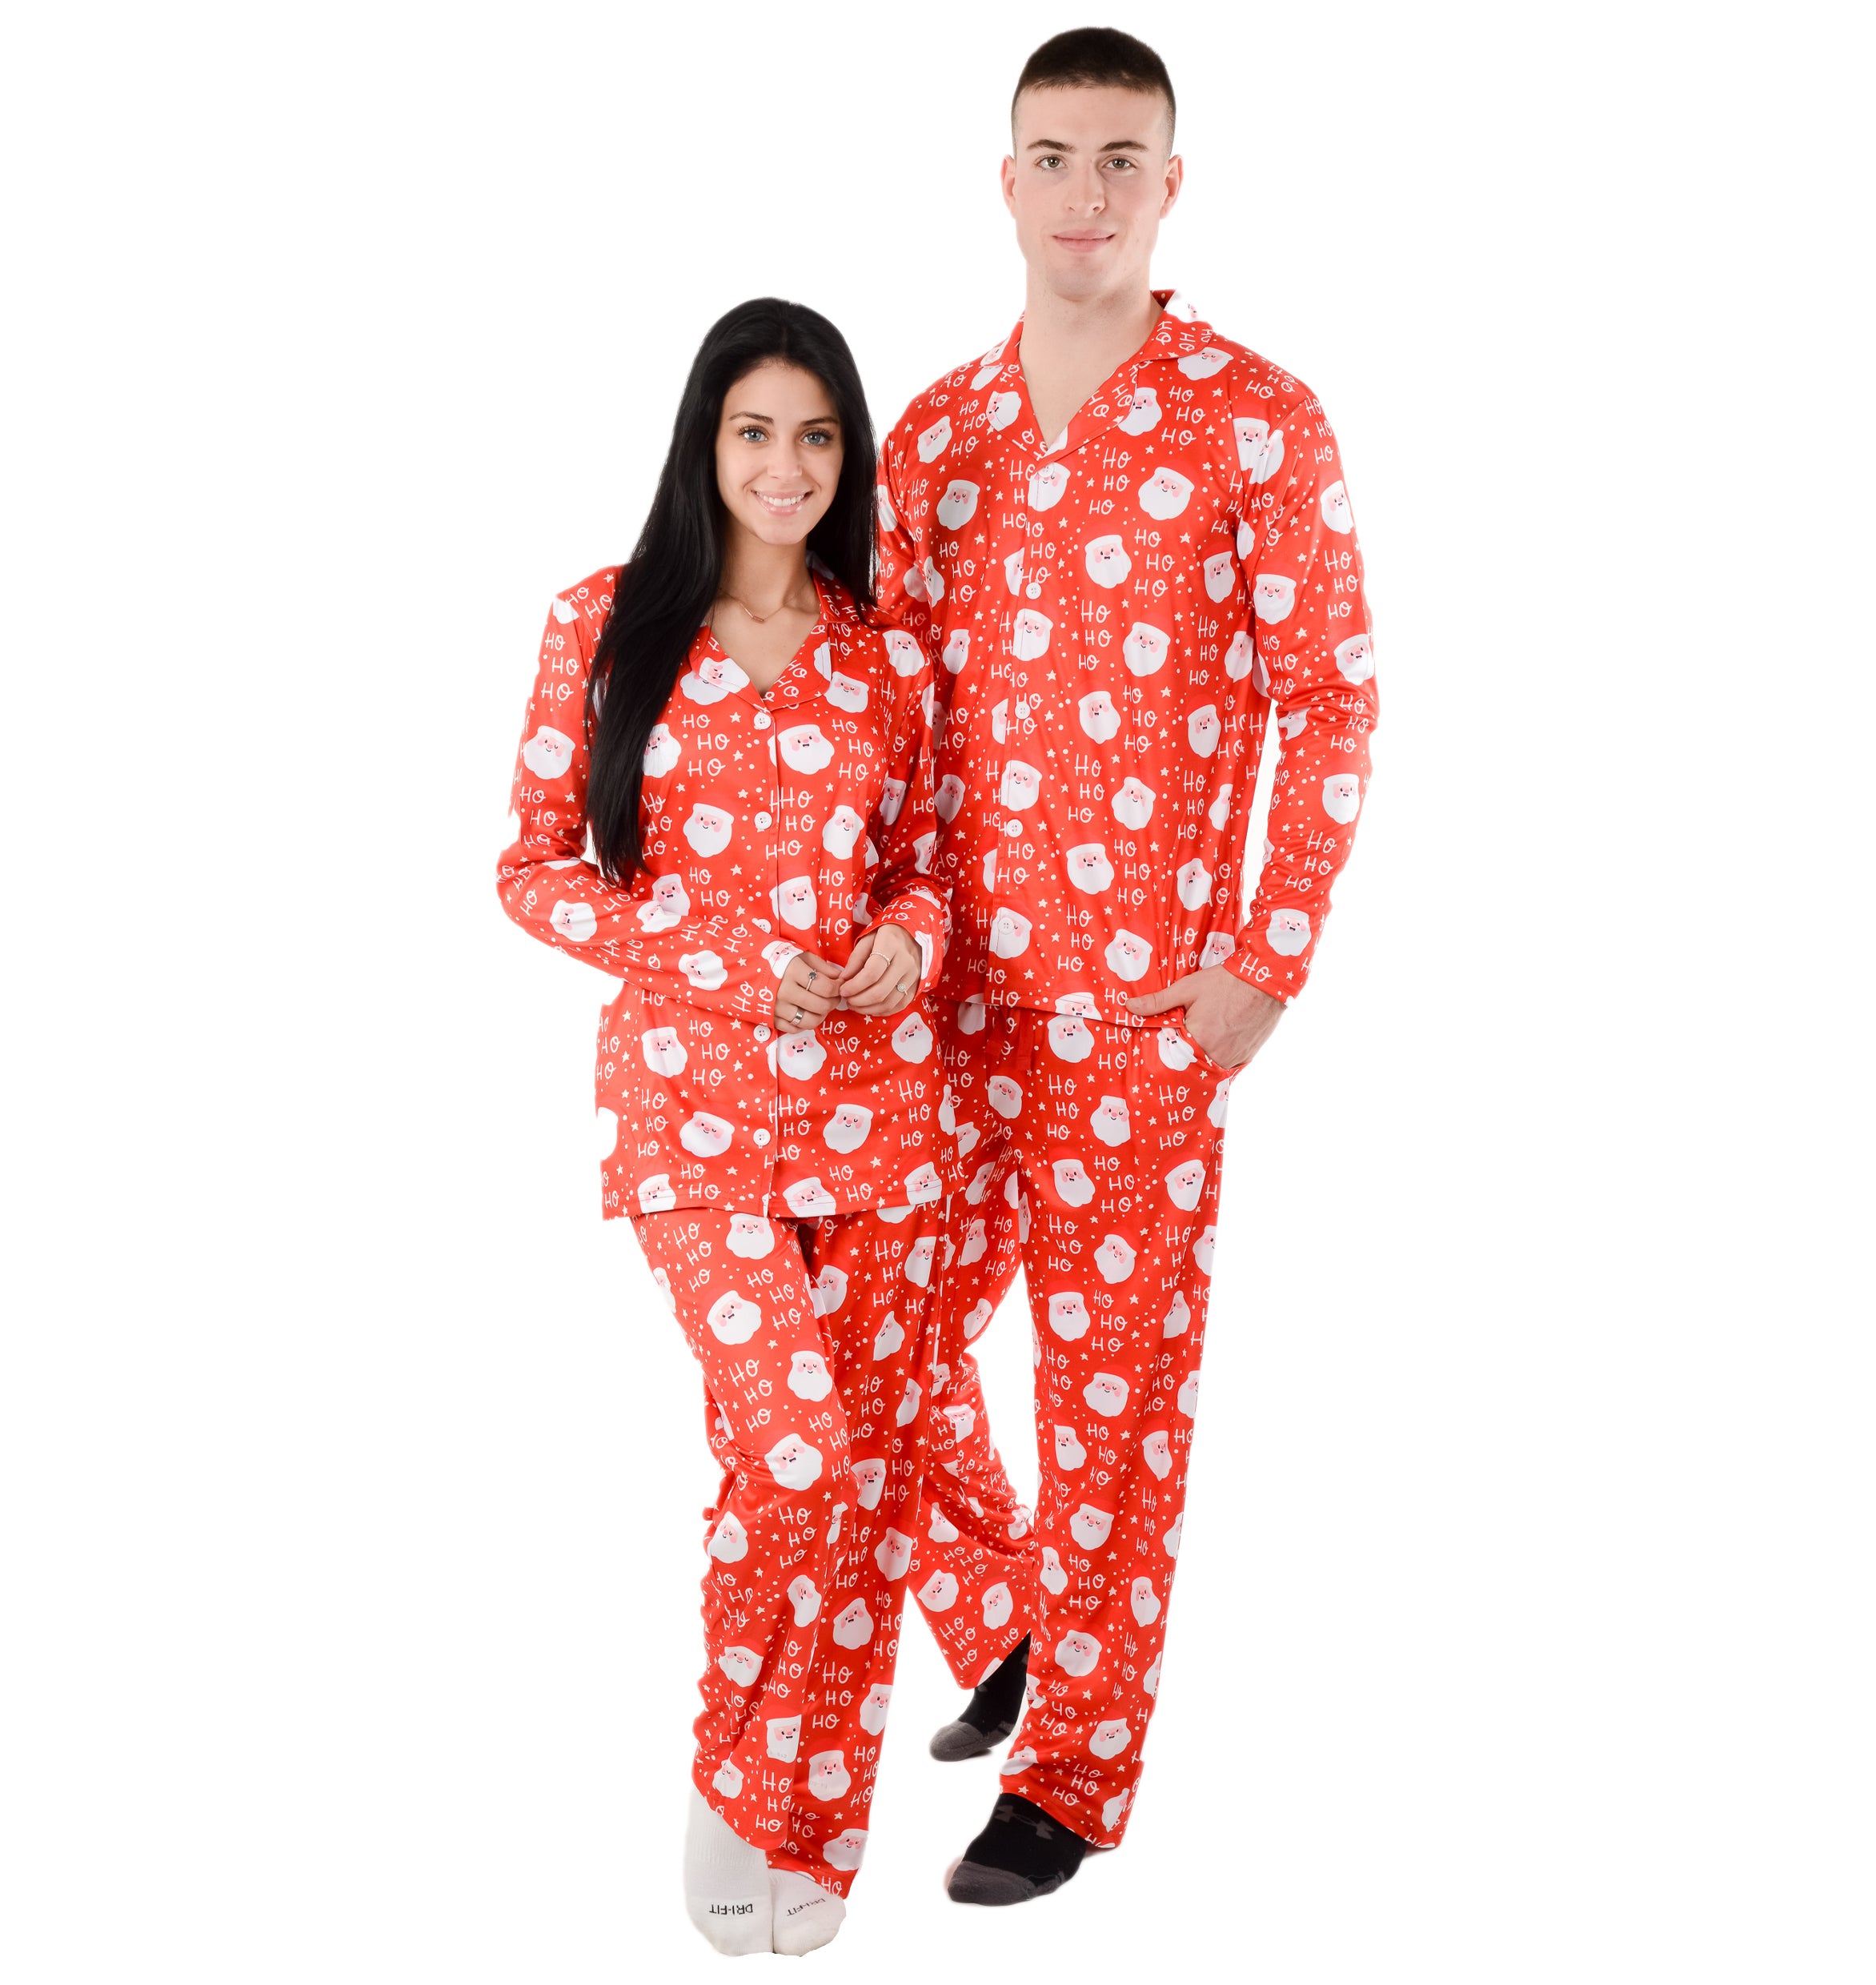  LSOLMD Deals of the Day Clearance Prime Family Christmas  Pajamas Matching Sets Xmas Matching Pjs for Adults Holiday Home Xmas  Sleepwear Set Loungewear : Sports & Outdoors